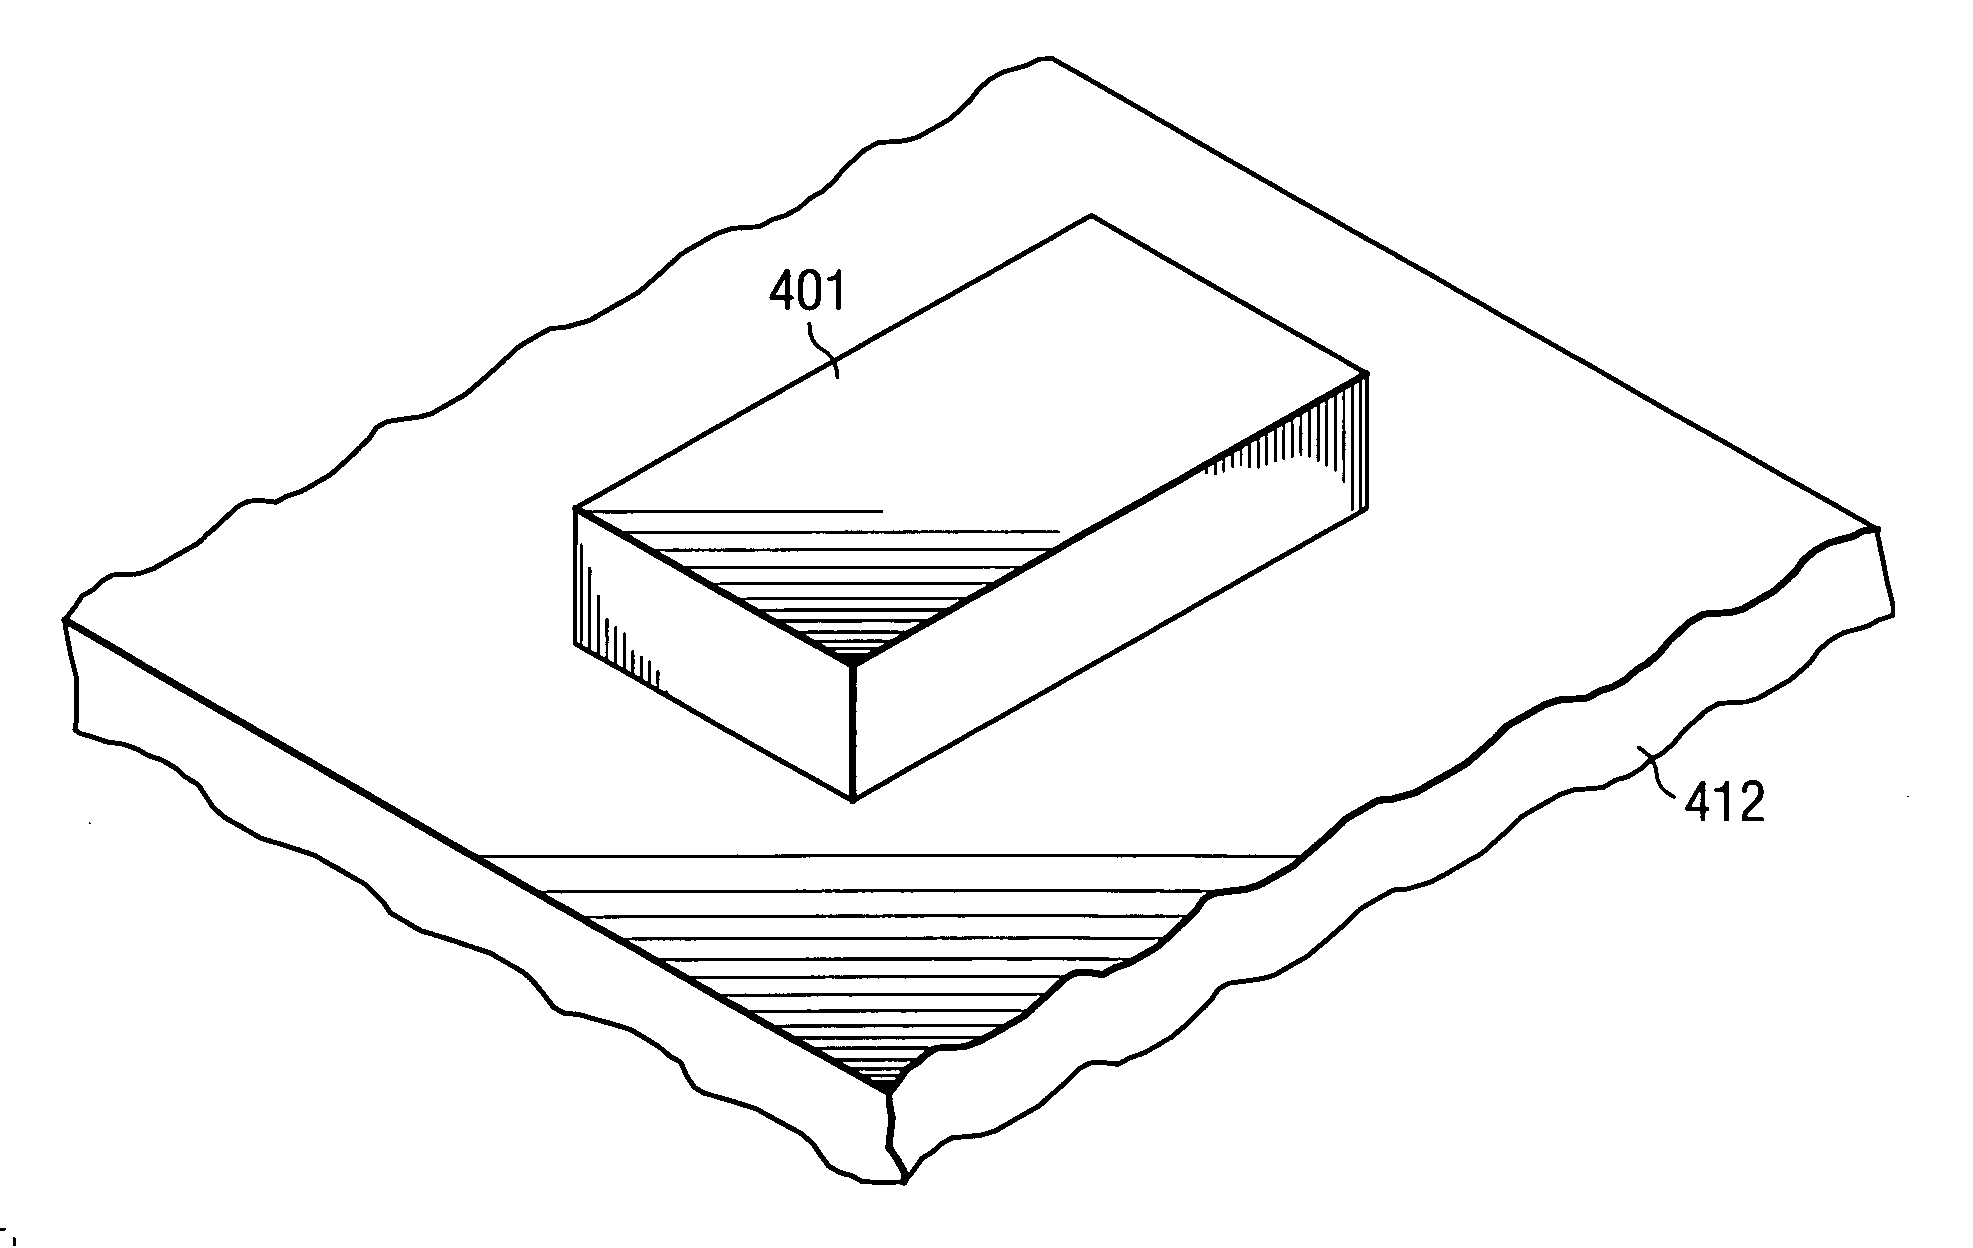 Trench-gate electrode for FinFET device